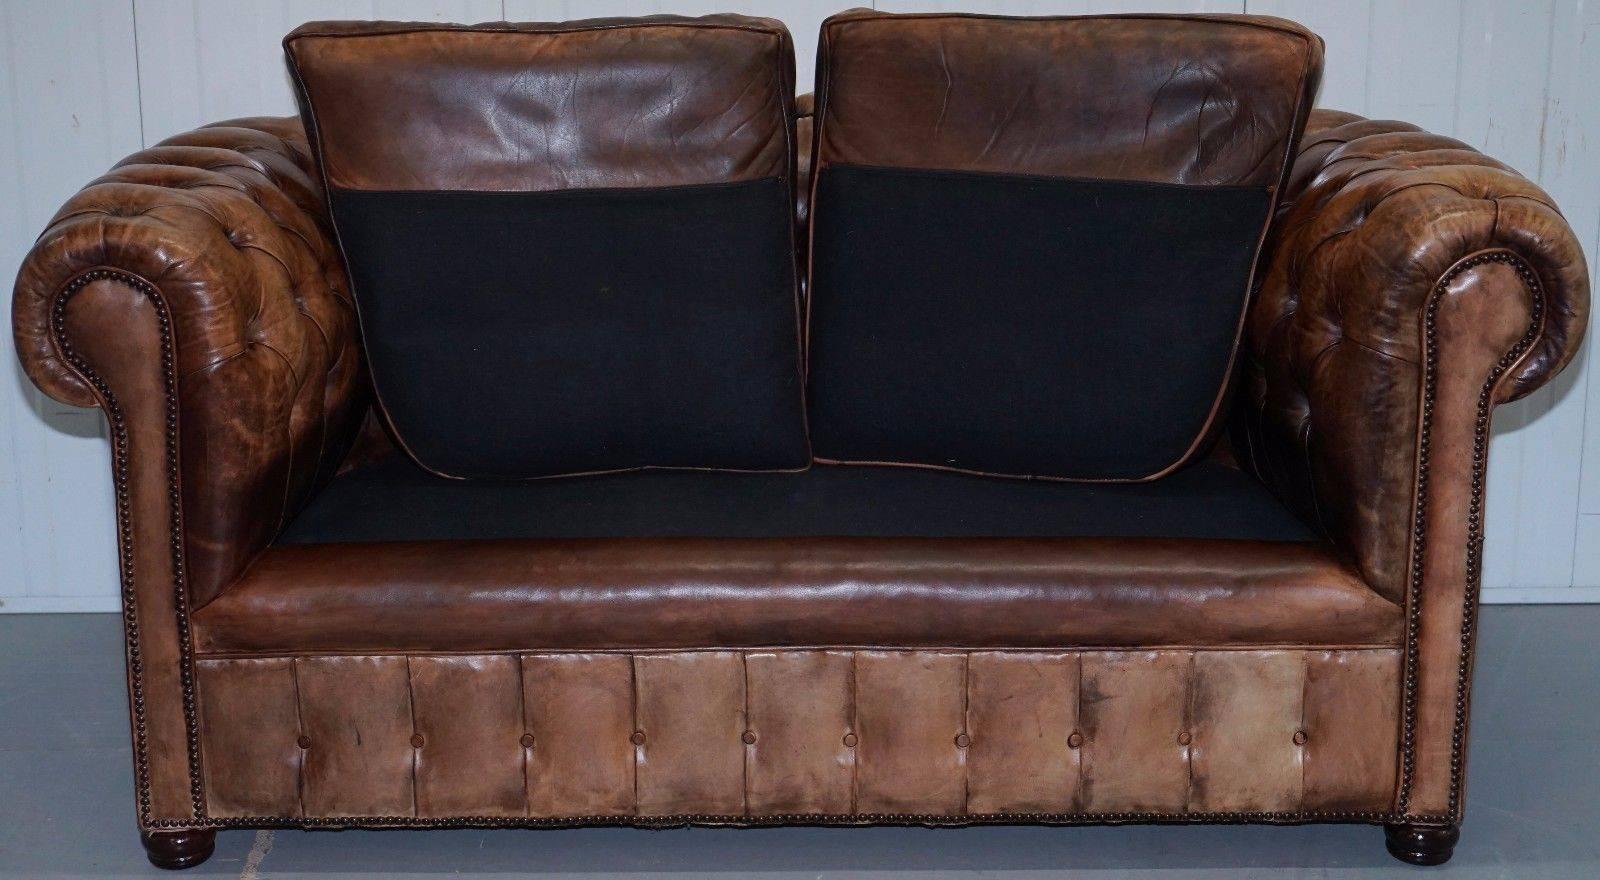 Wimbledon-Furniture is delighted to offer for sale this very rare model absolutely stunning handmade in England and of the finest quality original 1920s Chesterfield Gentleman’s club sofa
 
Please note the delivery fee listed is just a guide, for